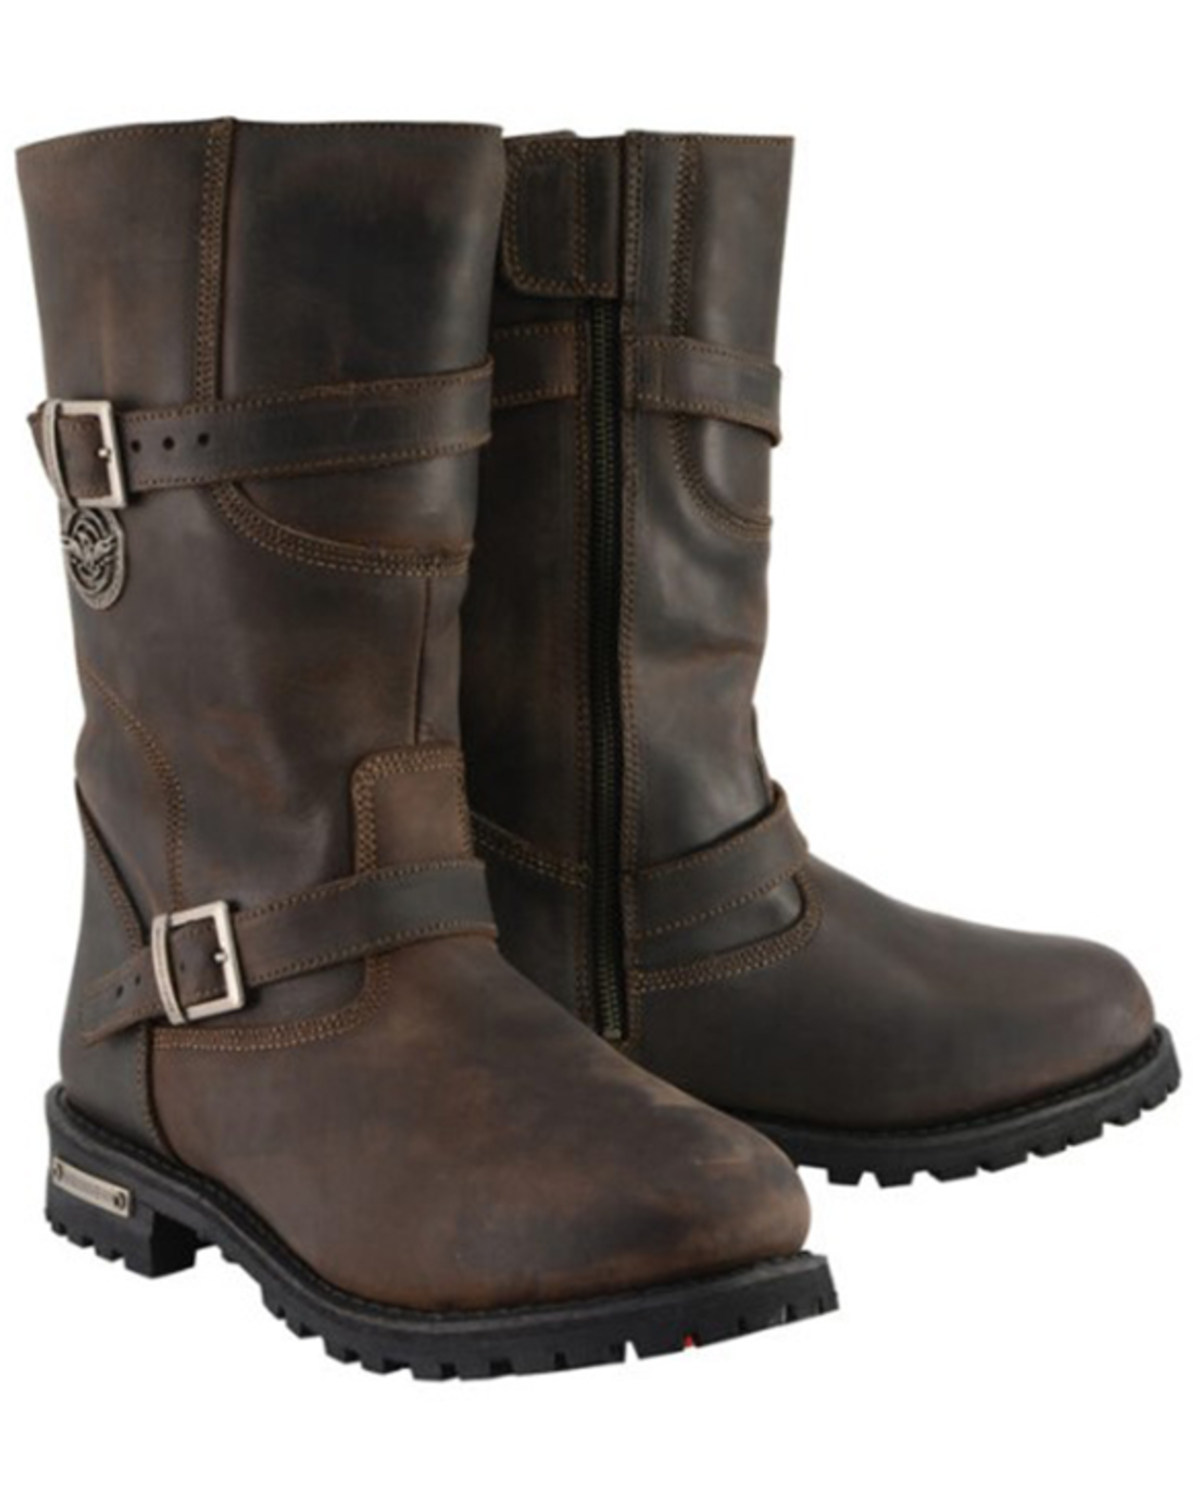 Milwaukee Leather Men's Classic Engineer Motorcycle Boots